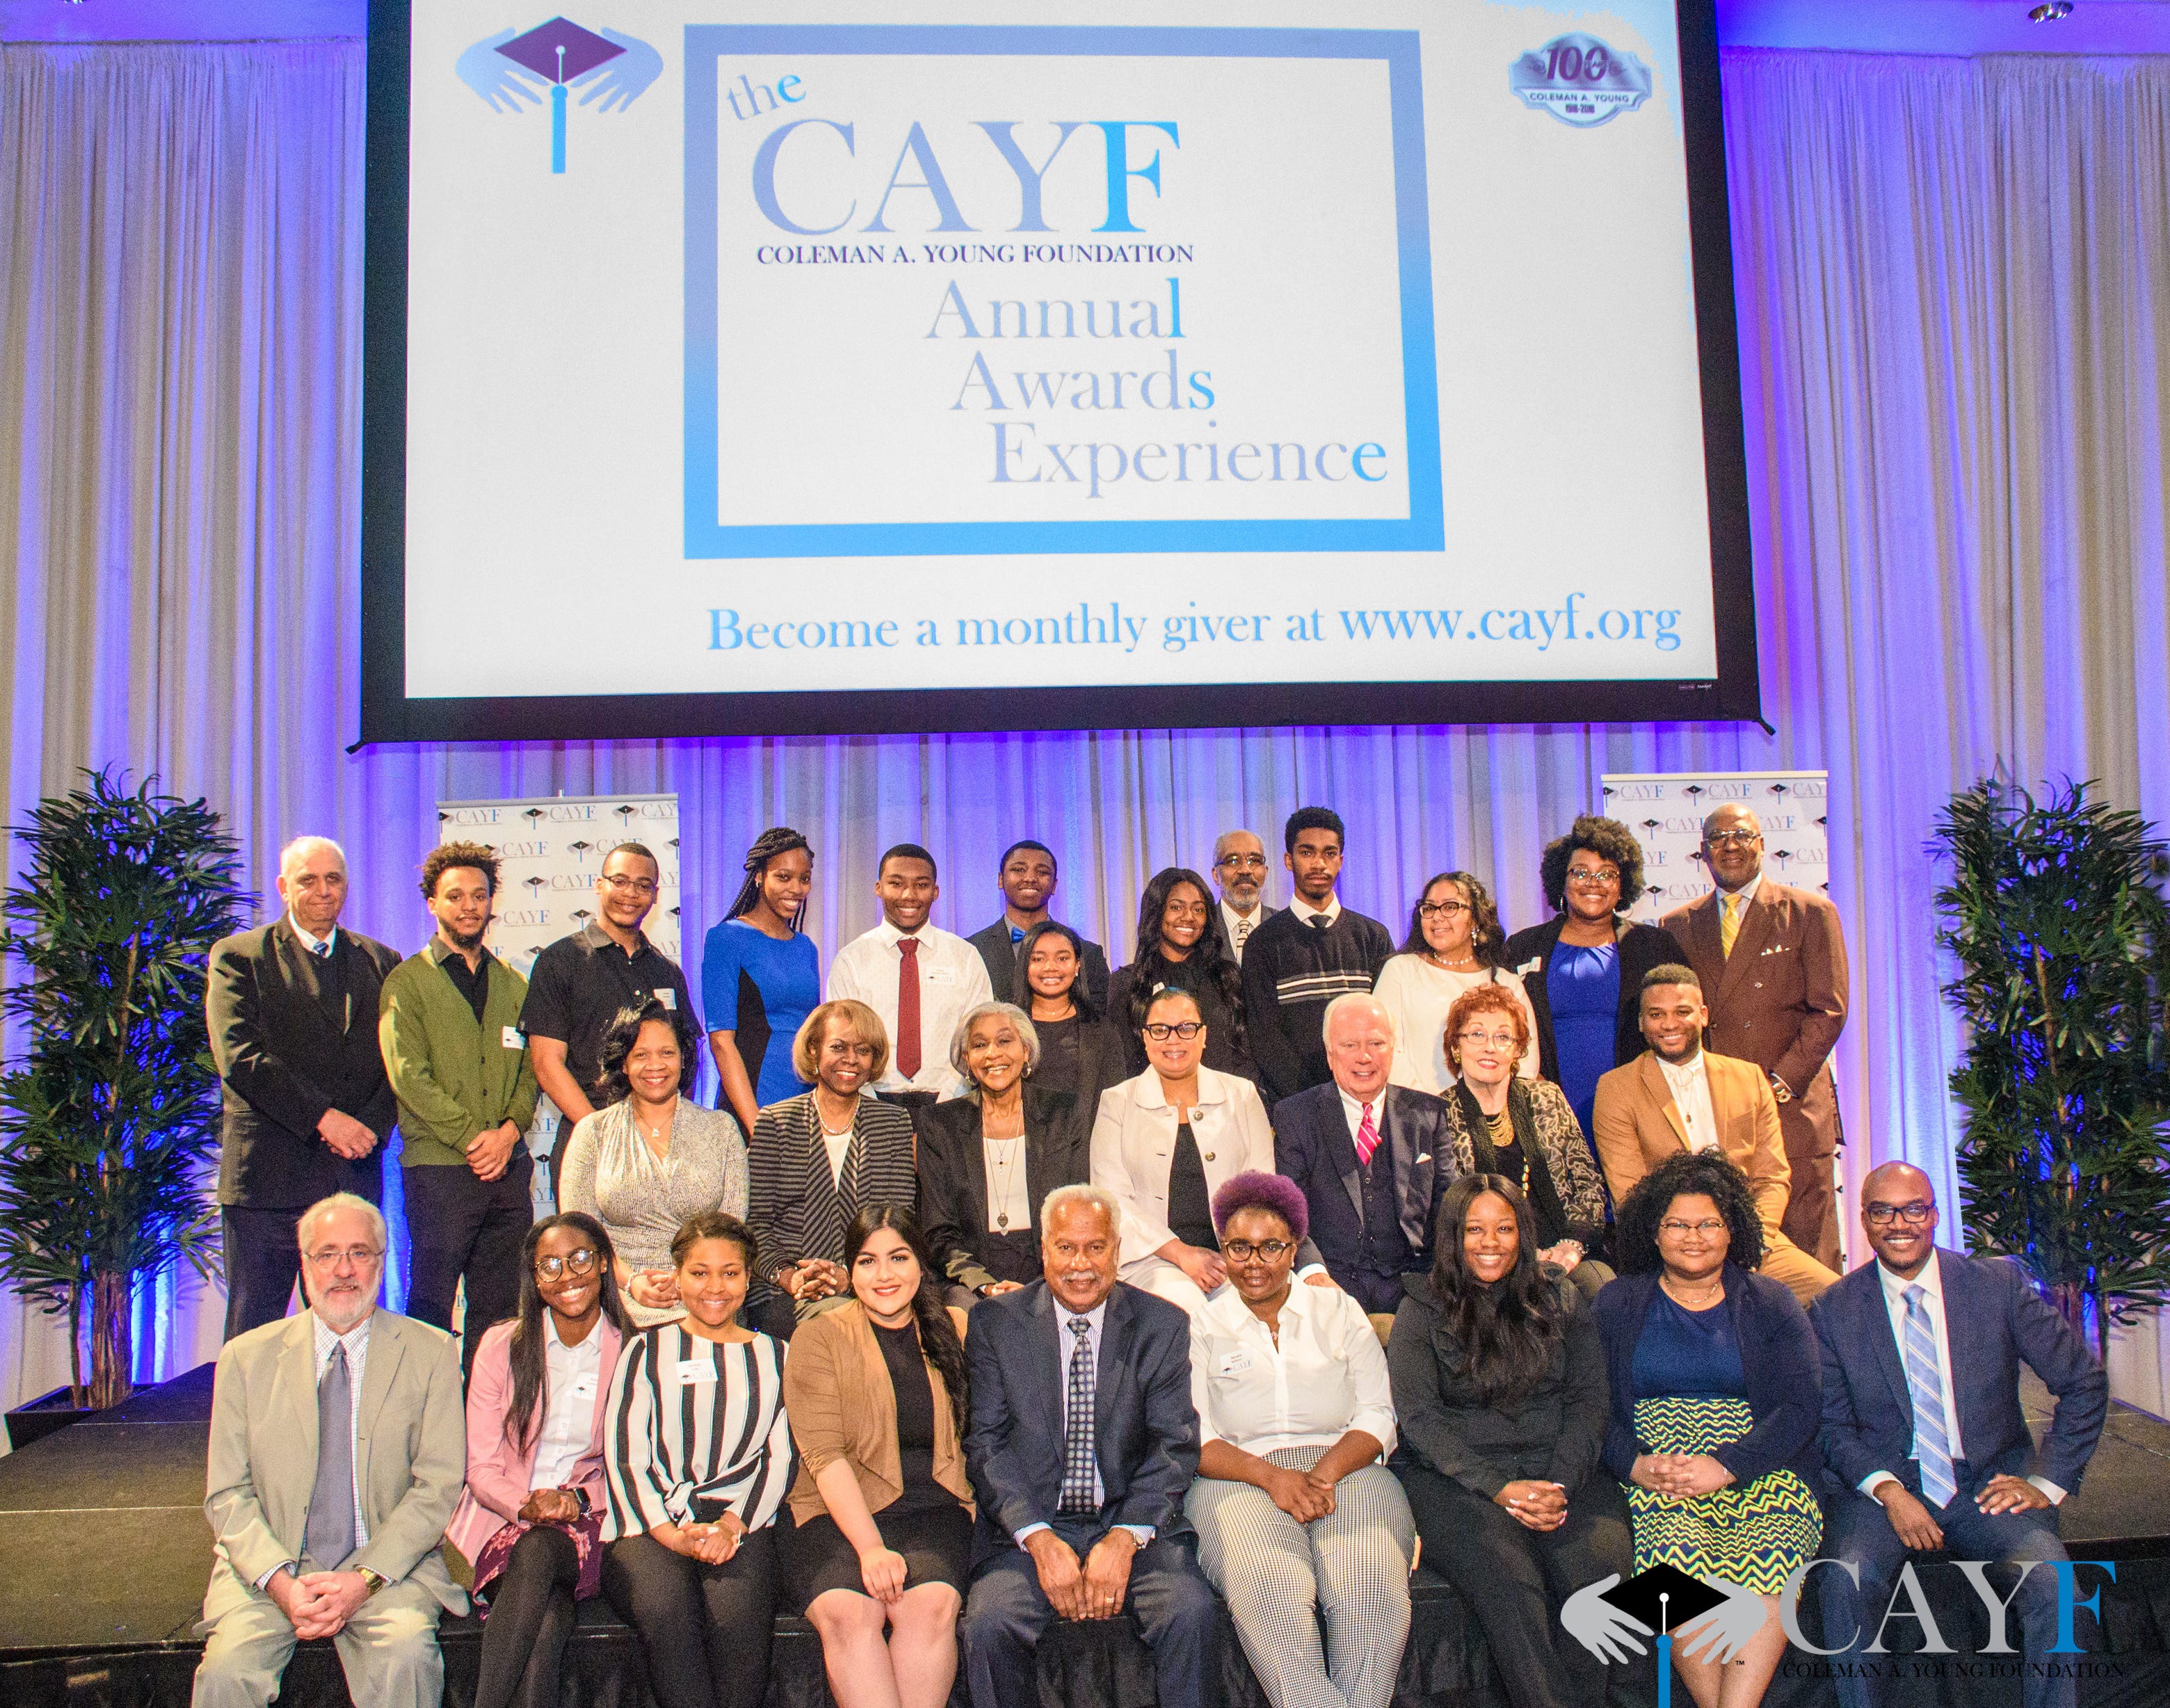 Coleman A. Young Foundation scholarship recipients--past and present--along with staff and board members have not been able to come together for the CAYF Annual Awards Experience since 2019.  CAYF leadership is hopeful that the 2022 CAYF scholarship recipients will be able to be recognized at an in-person, outdoor even this summer on the campus of the Marygrove Conservancy.